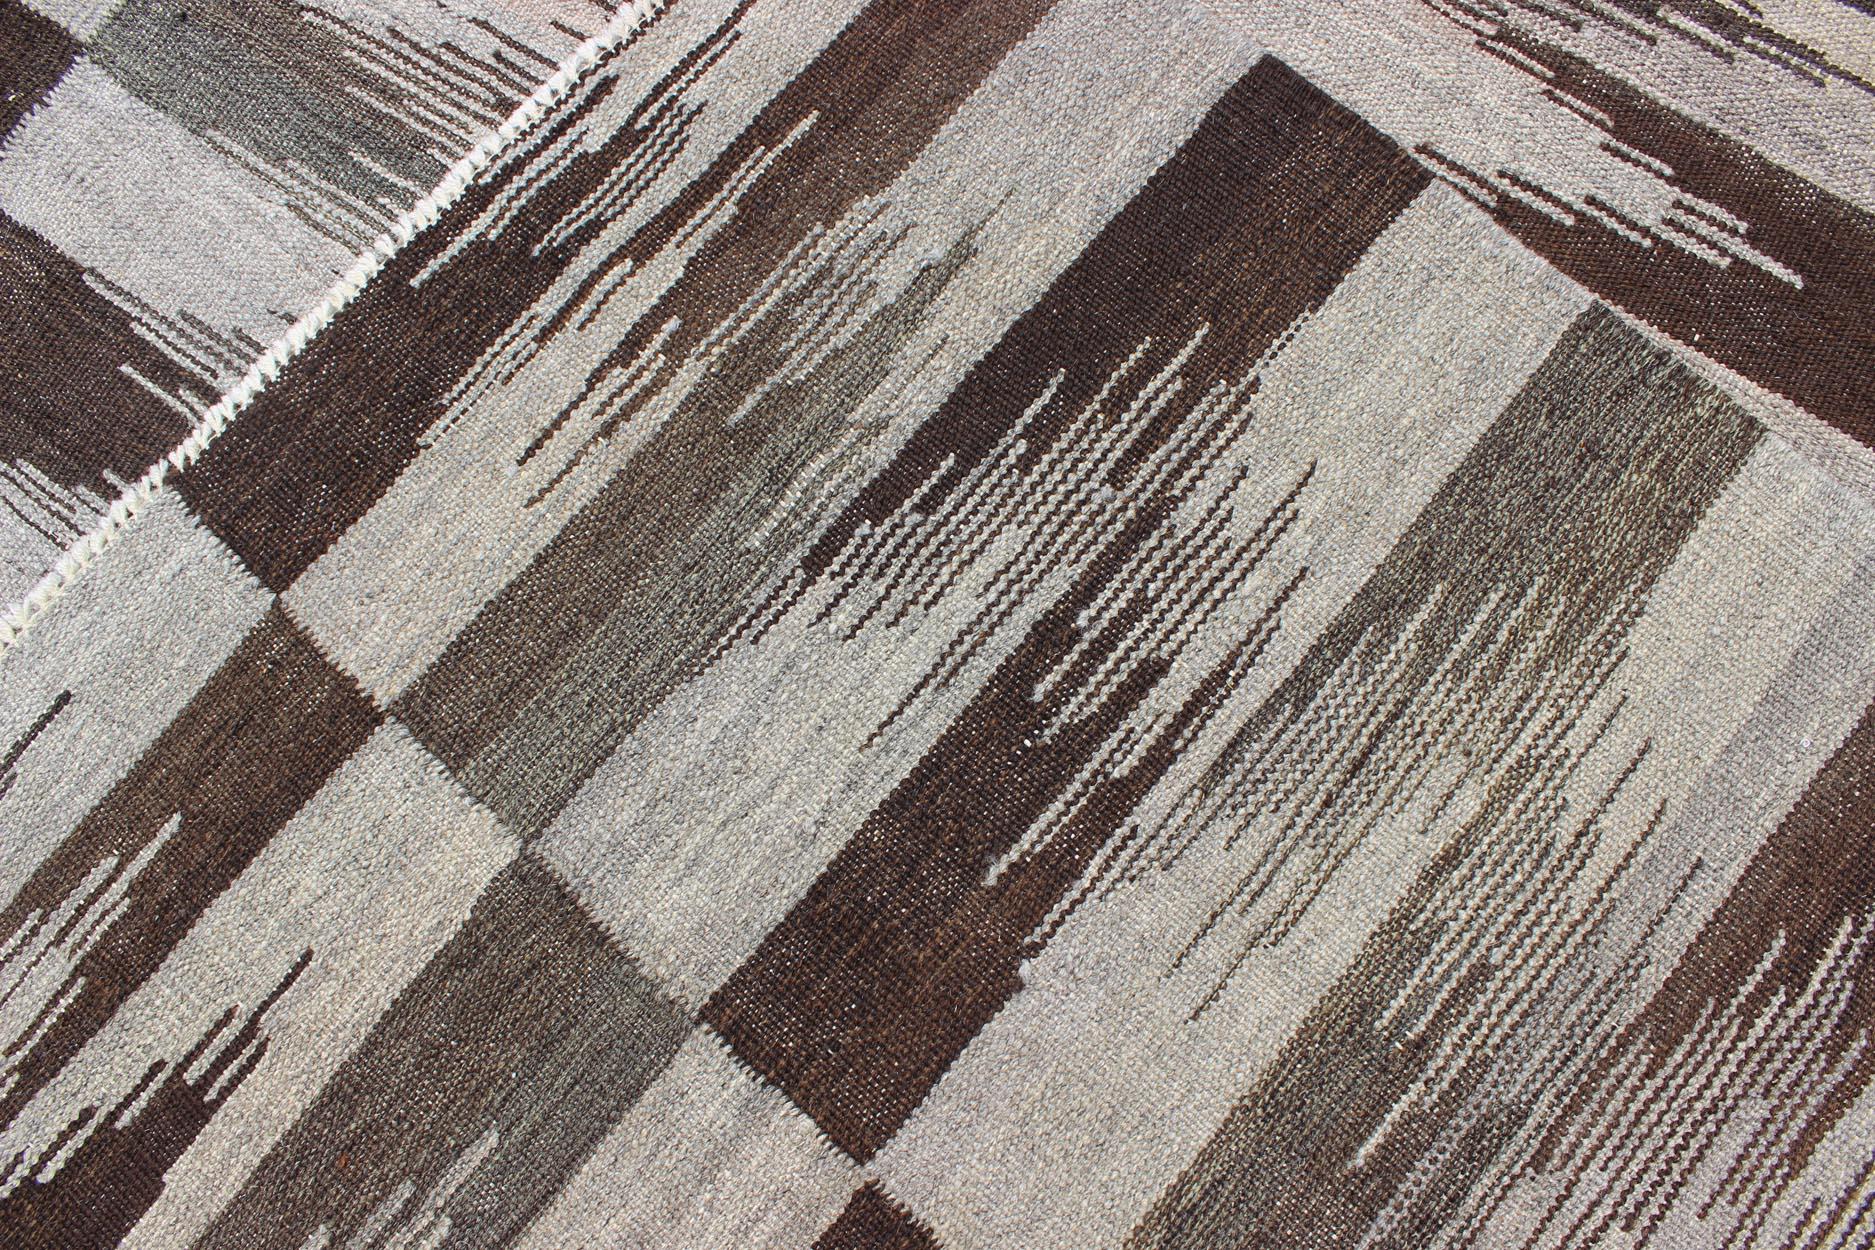  Fine Flat weave Modern Kilim in Neutrals, Browns and Greens Colors In New Condition For Sale In Atlanta, GA